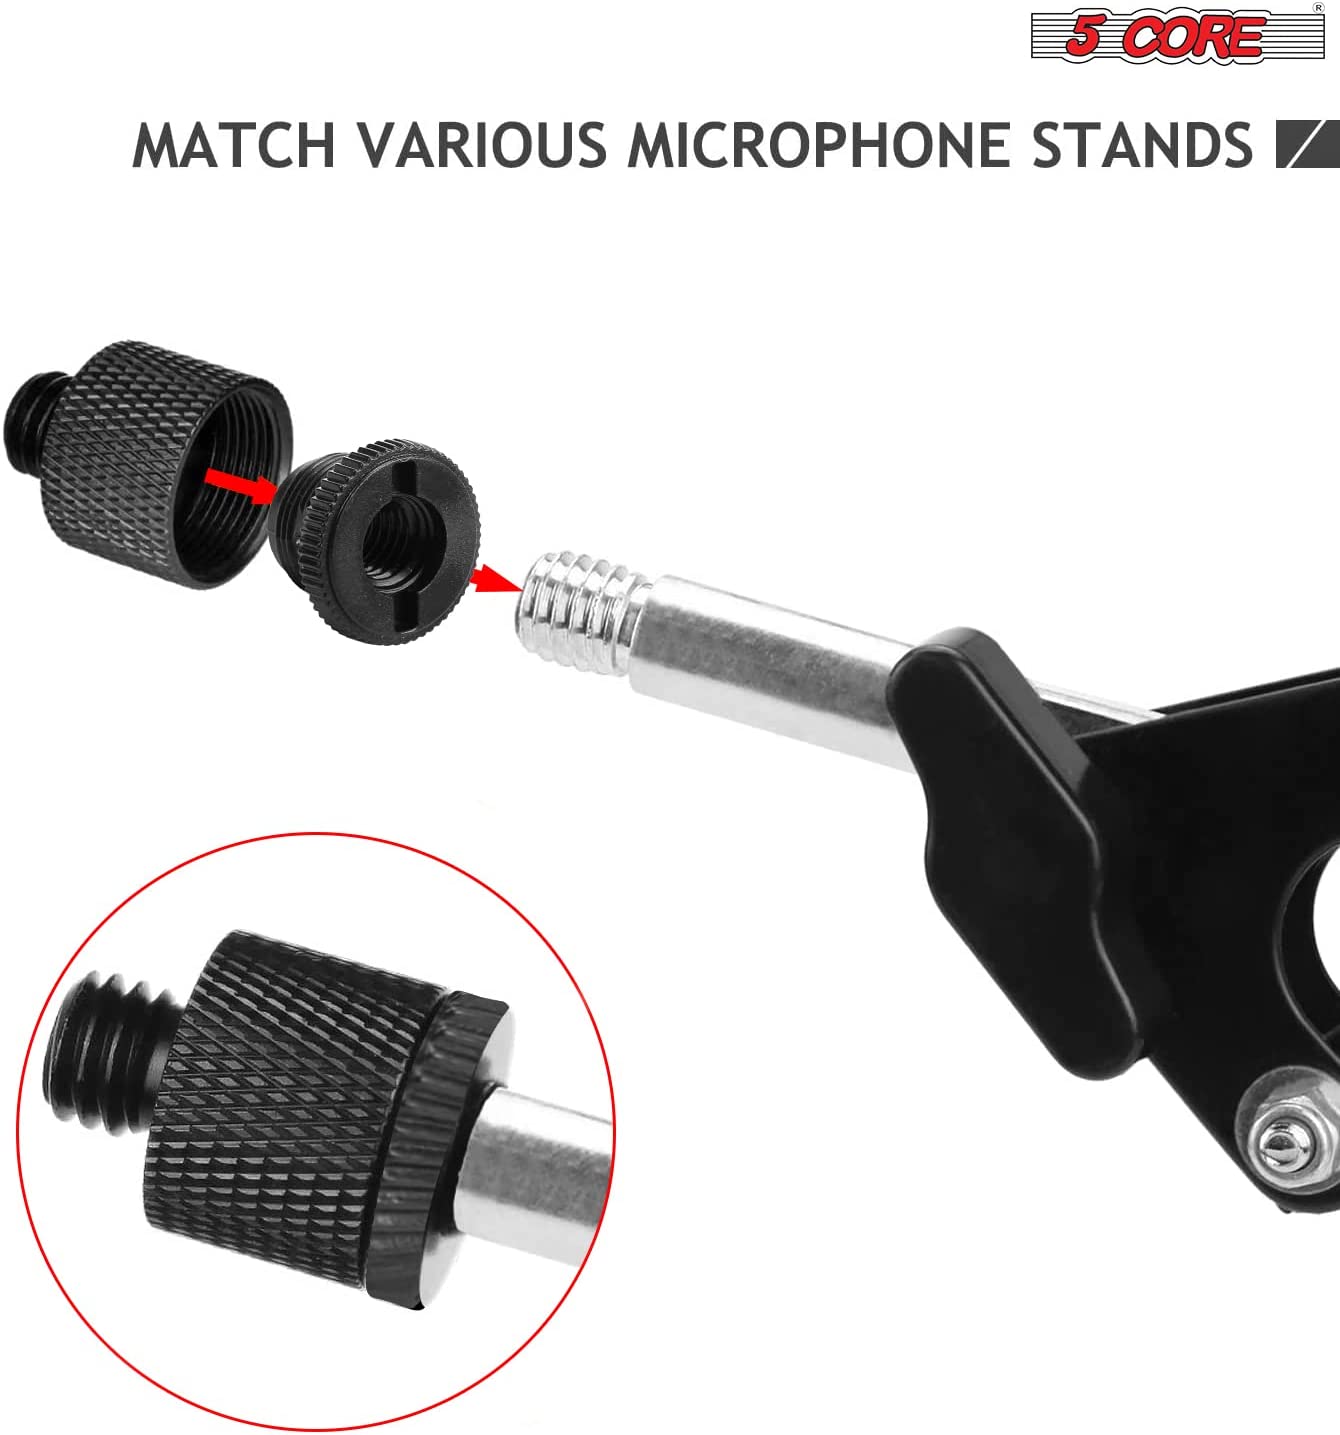 5 Core Mic Stand Adapter 4 Pieces Black 3/8 Female to 5/8 Male Plastic Mic Screw Adapter Microphone Tripod Stand Screw - MS ADP P BLK 4PCS-5